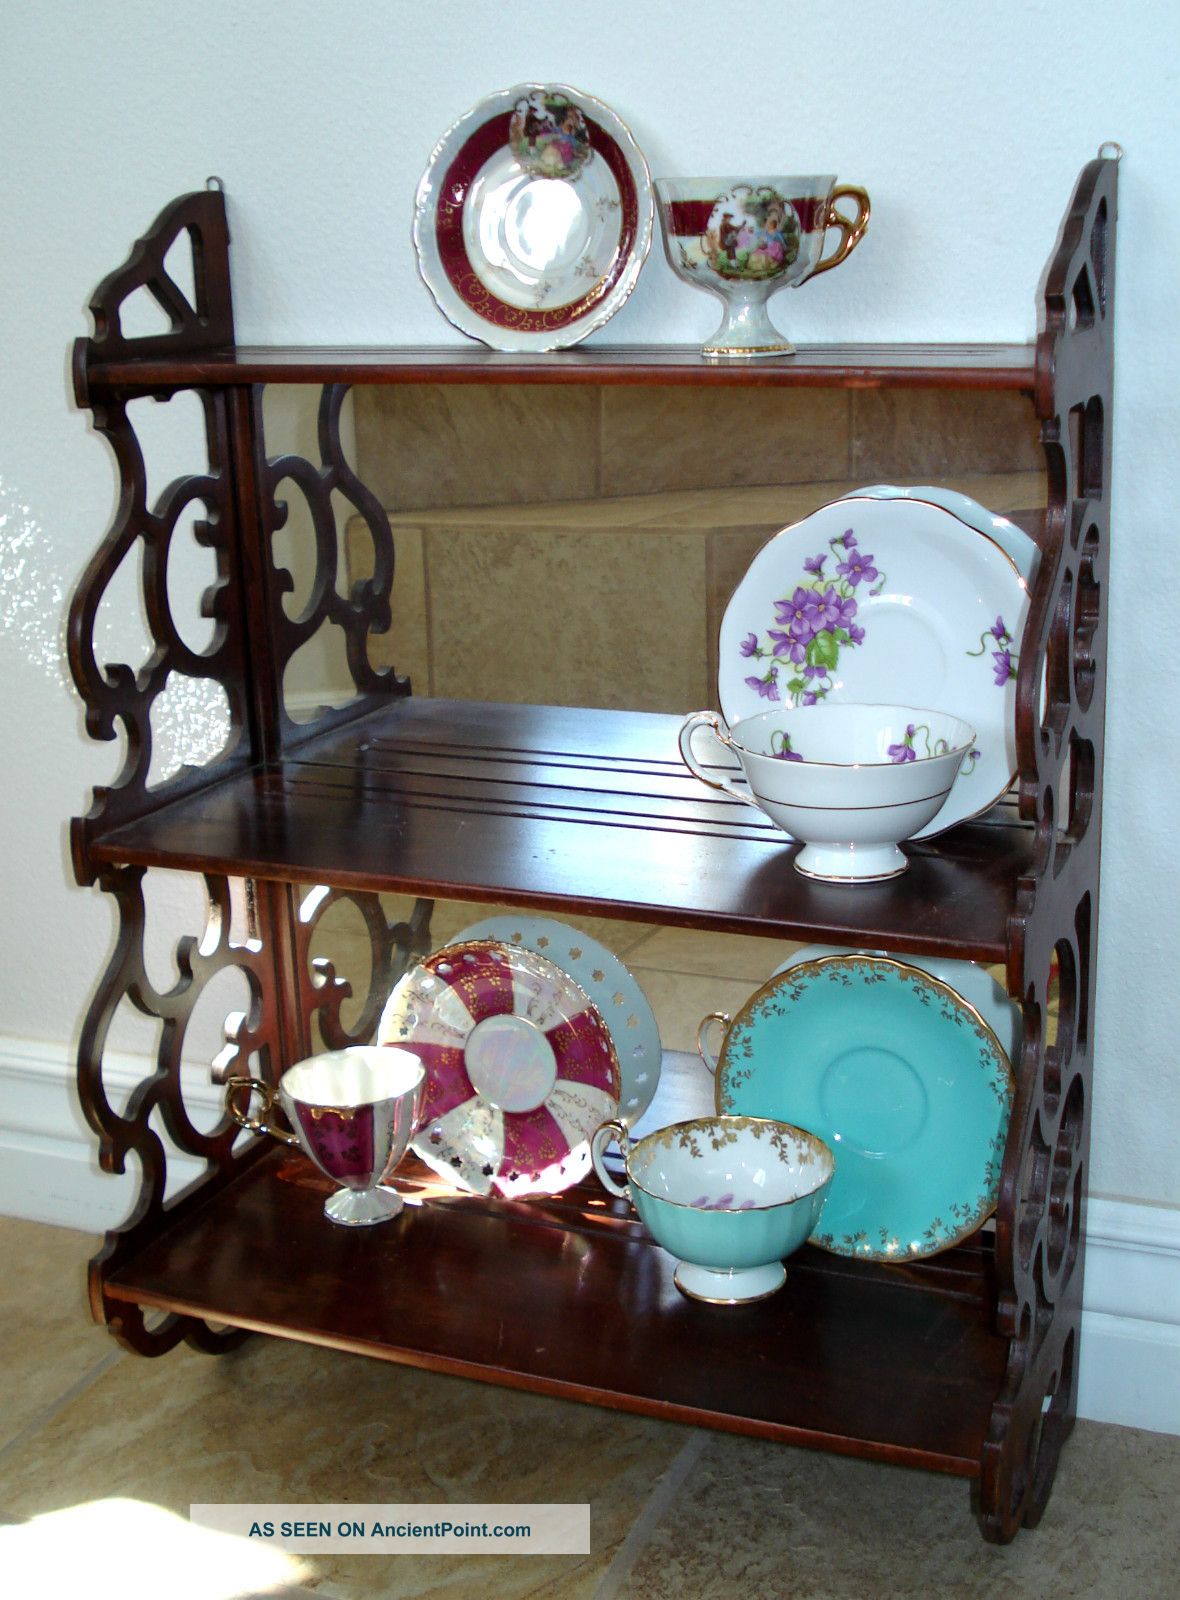 Antique Mirror & Wood Cup/plate Holder 3 Shelves Scrolled Trim - Contents Not Incl 1900-1950 photo